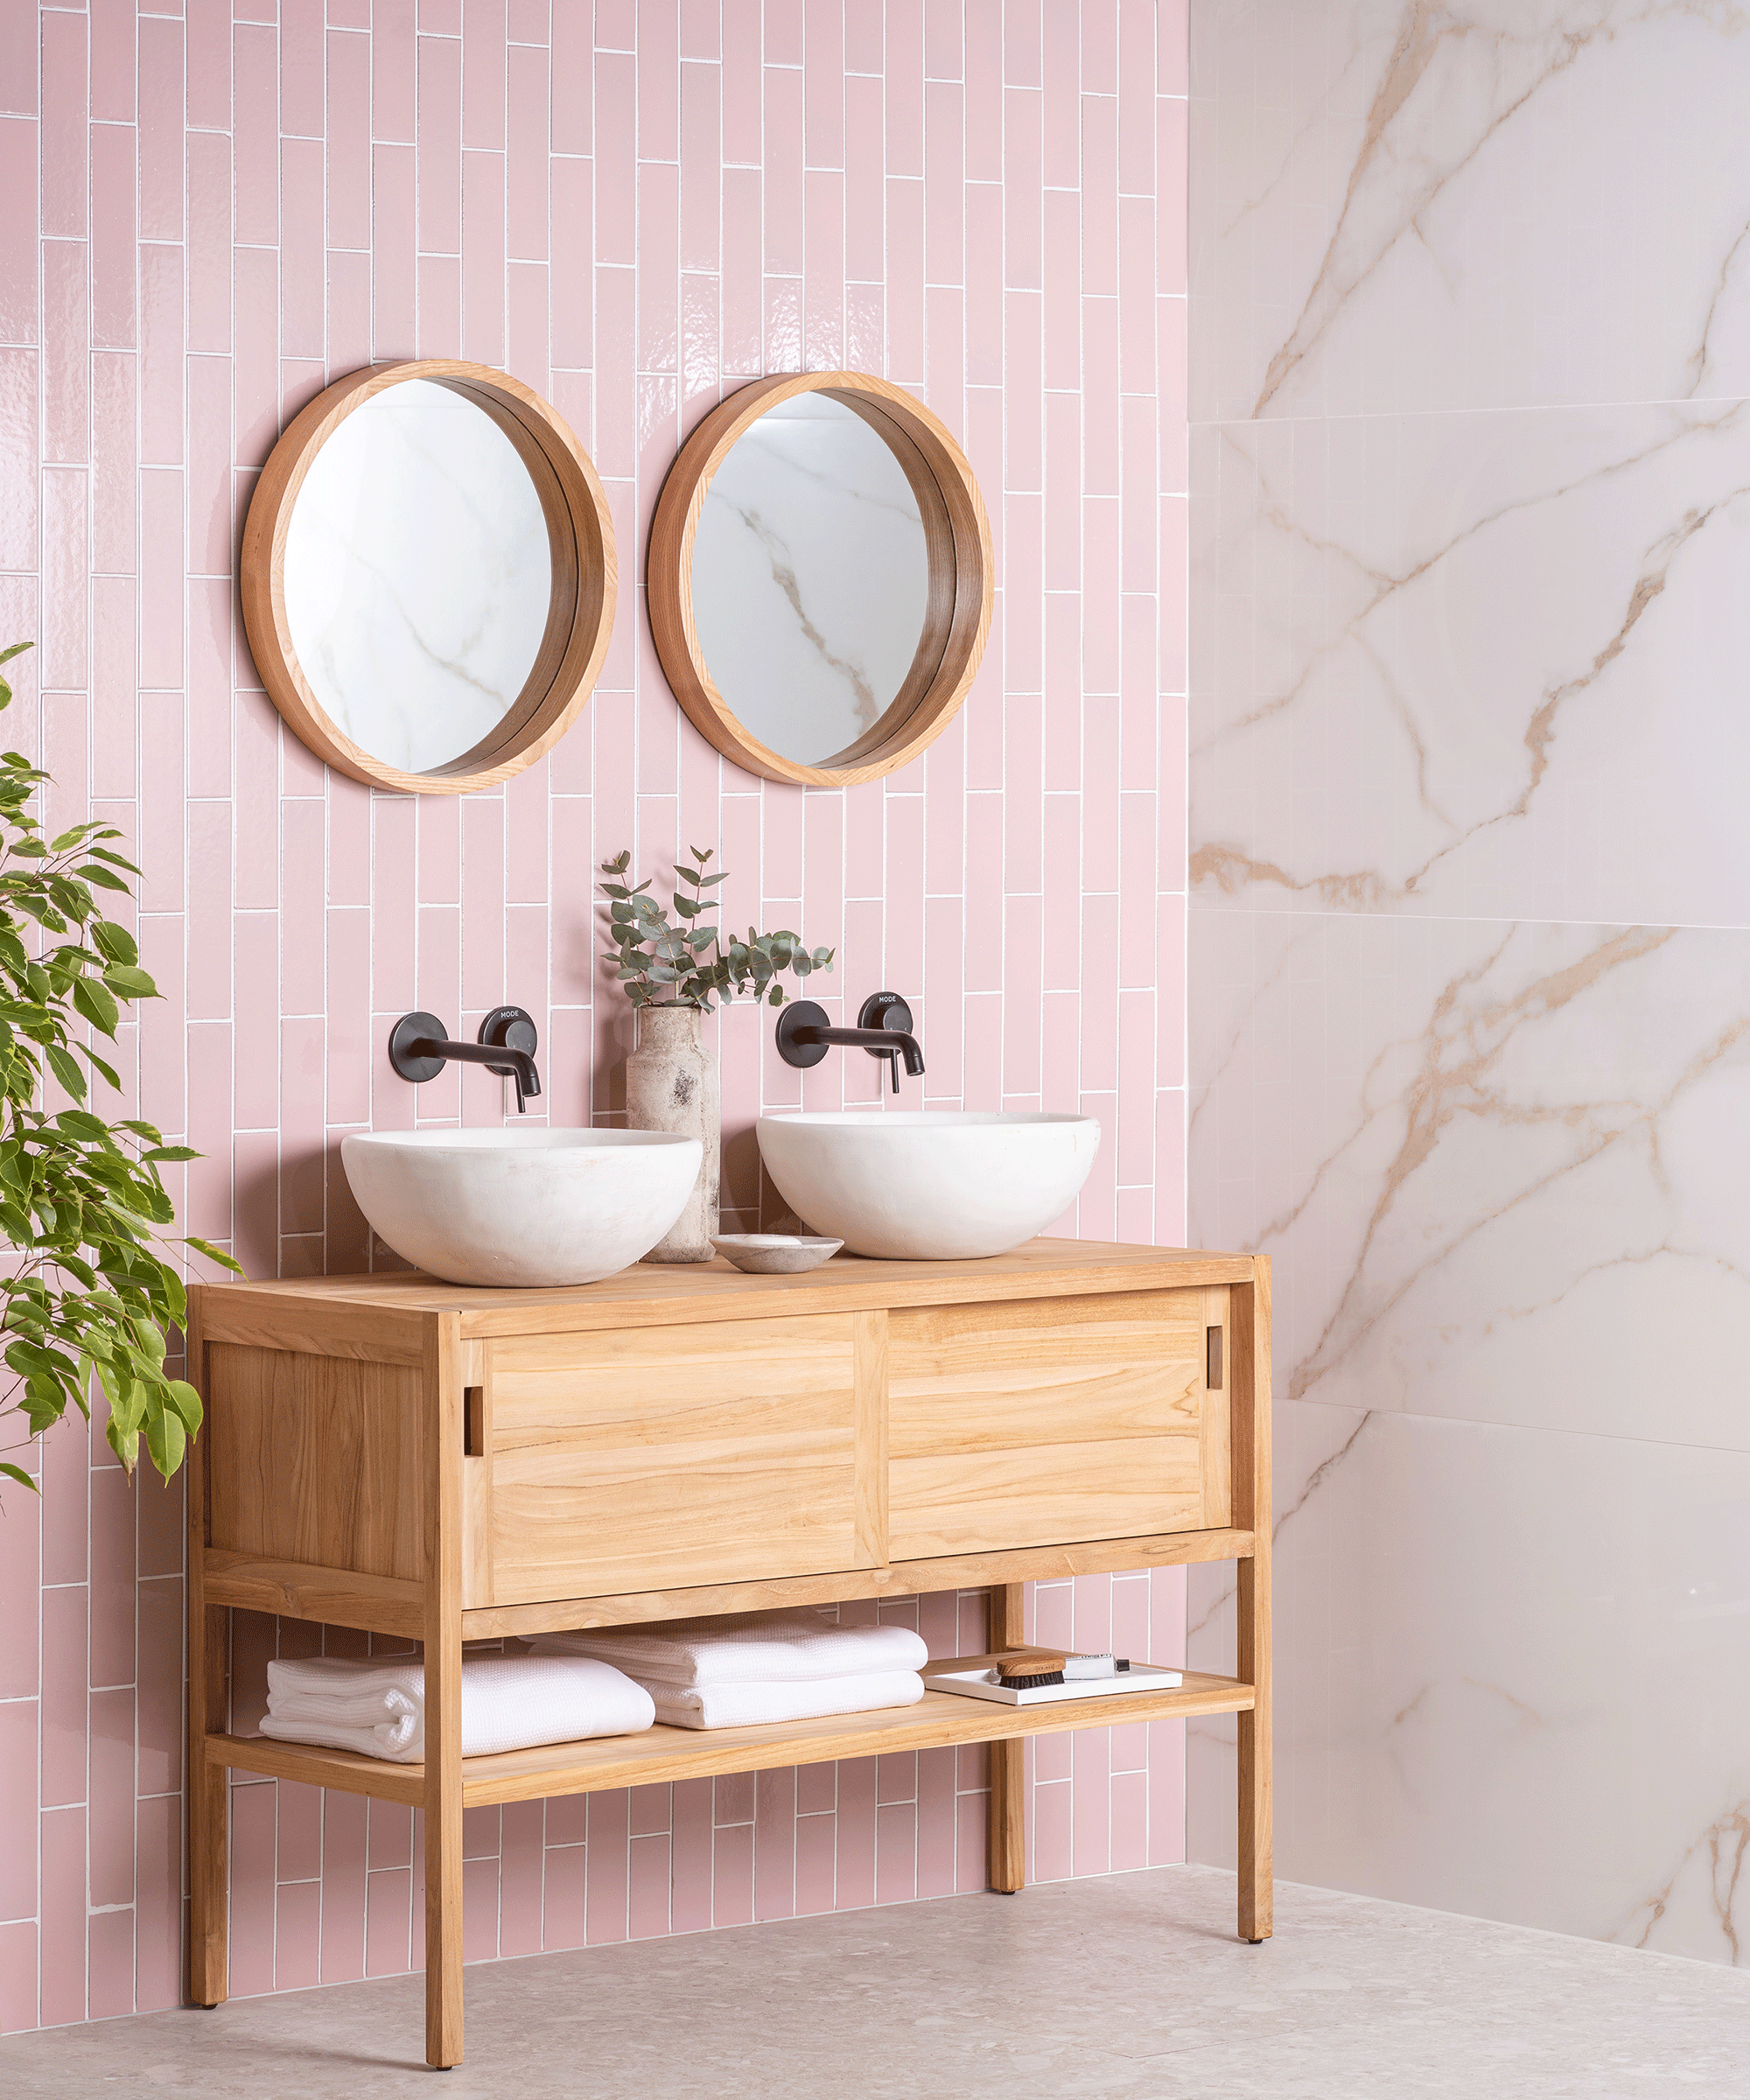 Pink vertical ceramic metro bathroom tiles in a modern bathroom, with another marble wall